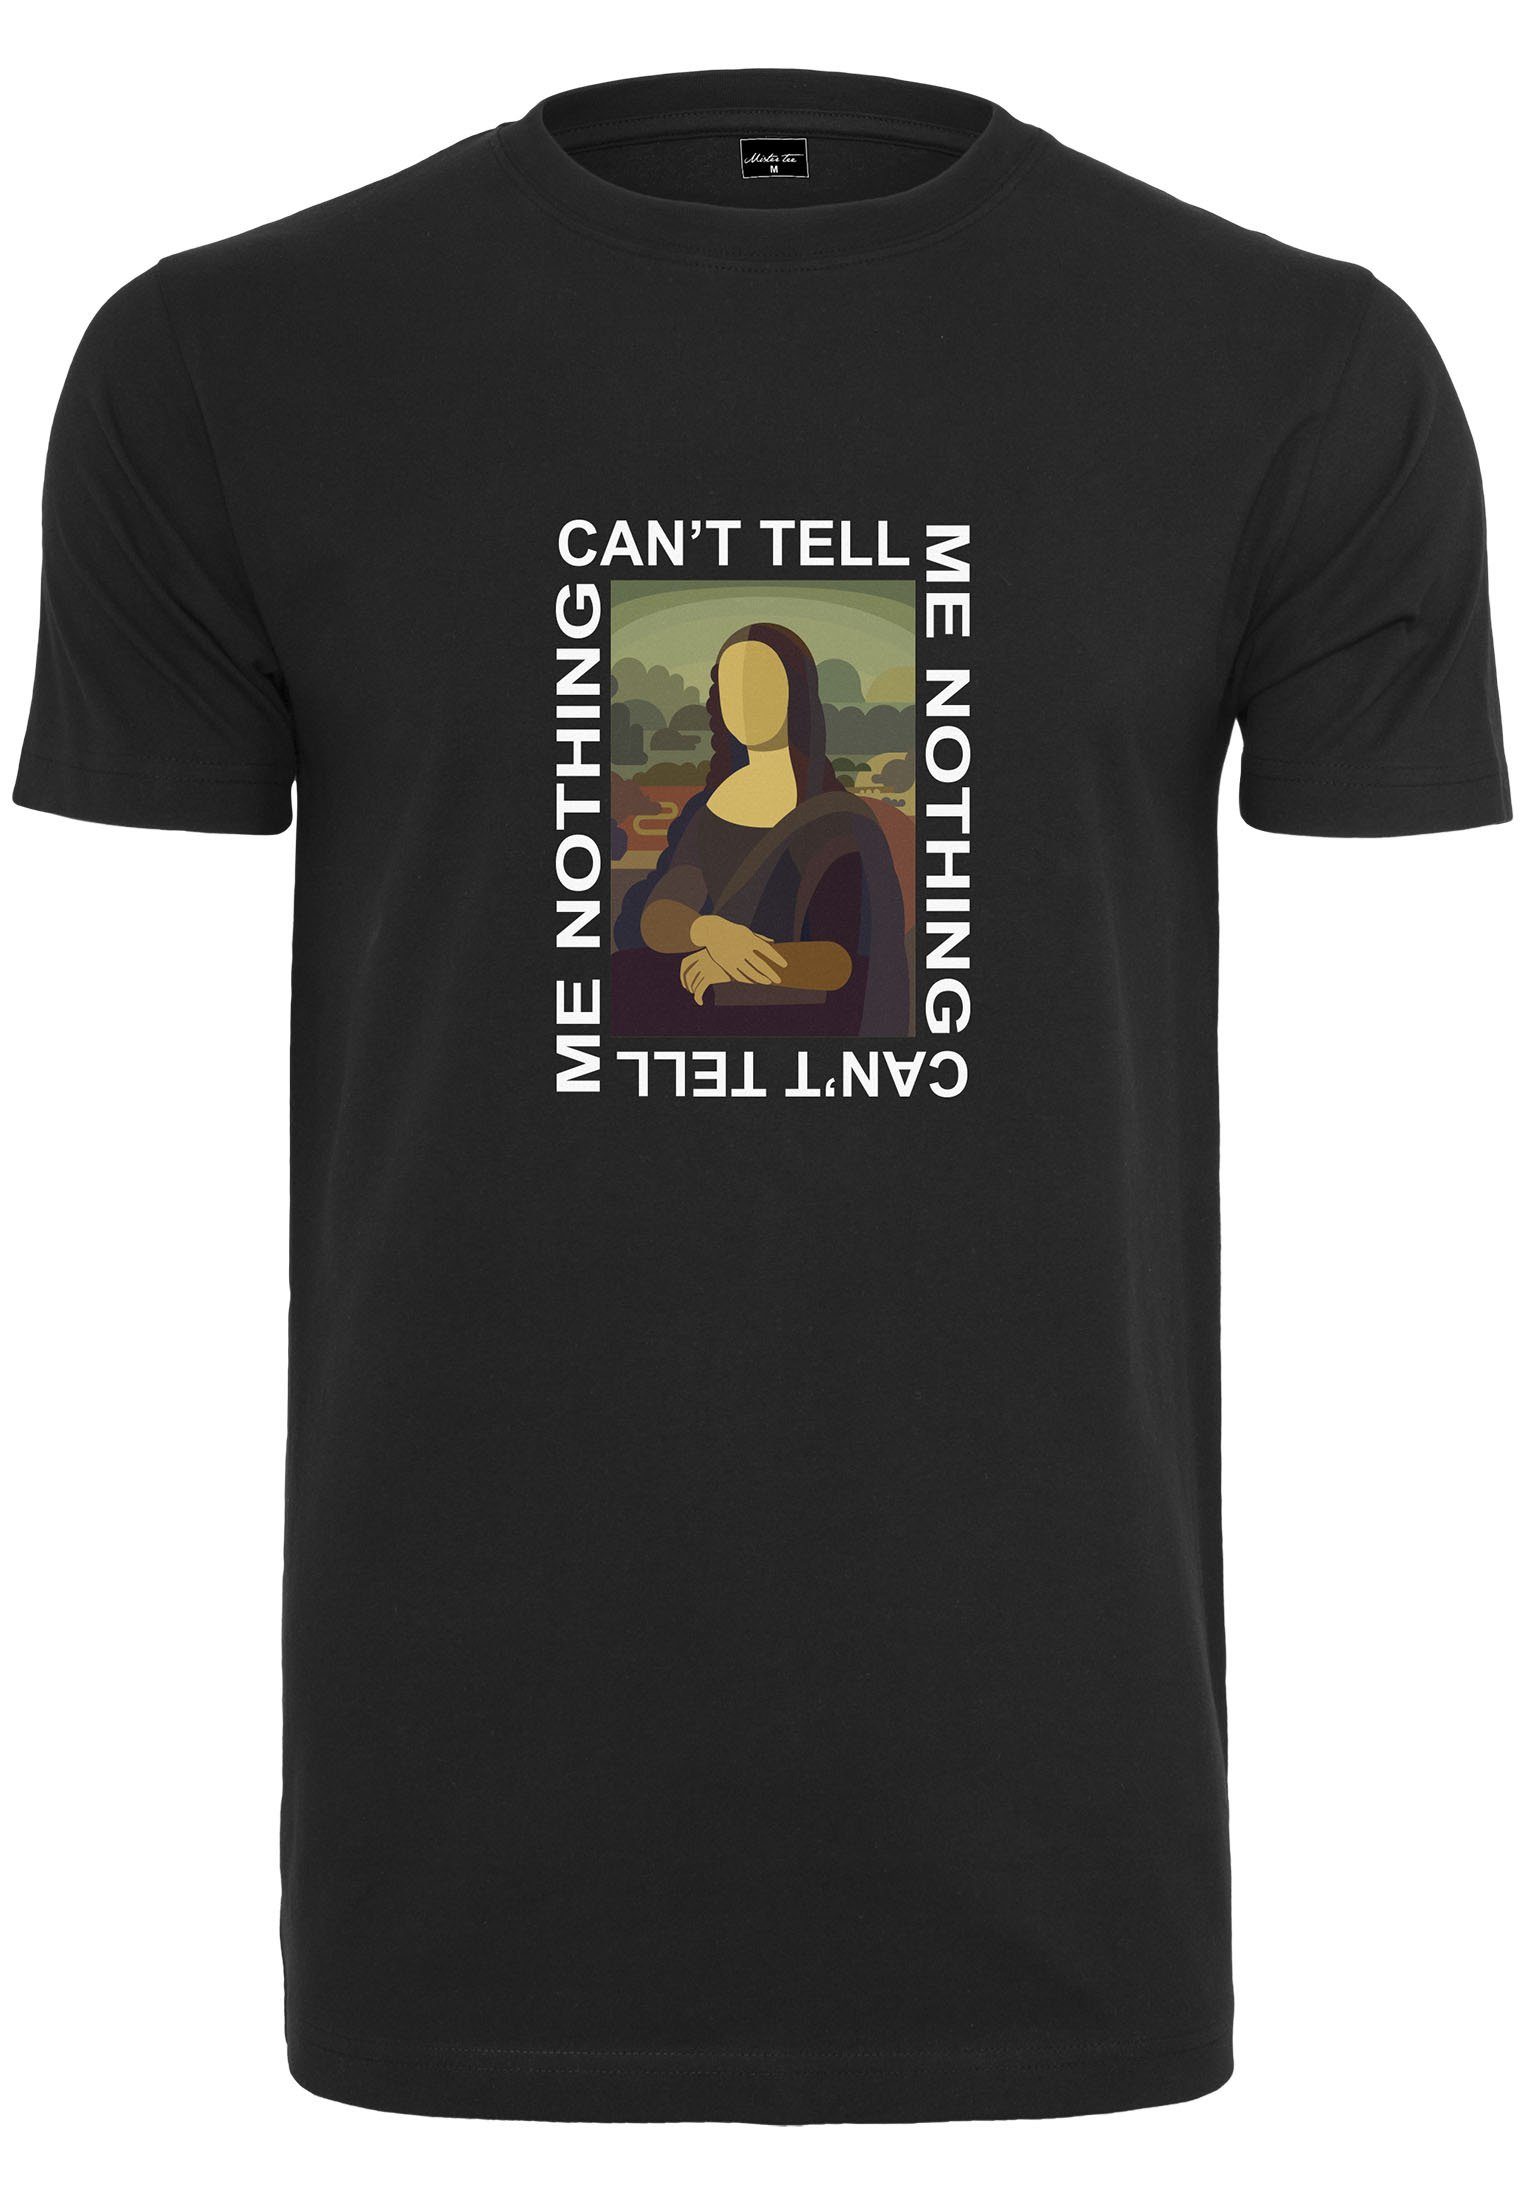 Me T-Shirt (1-tlg) Me Nothing black Cant Tee MisterTee MT1060 Tell Herren Tell Can´t Nothing